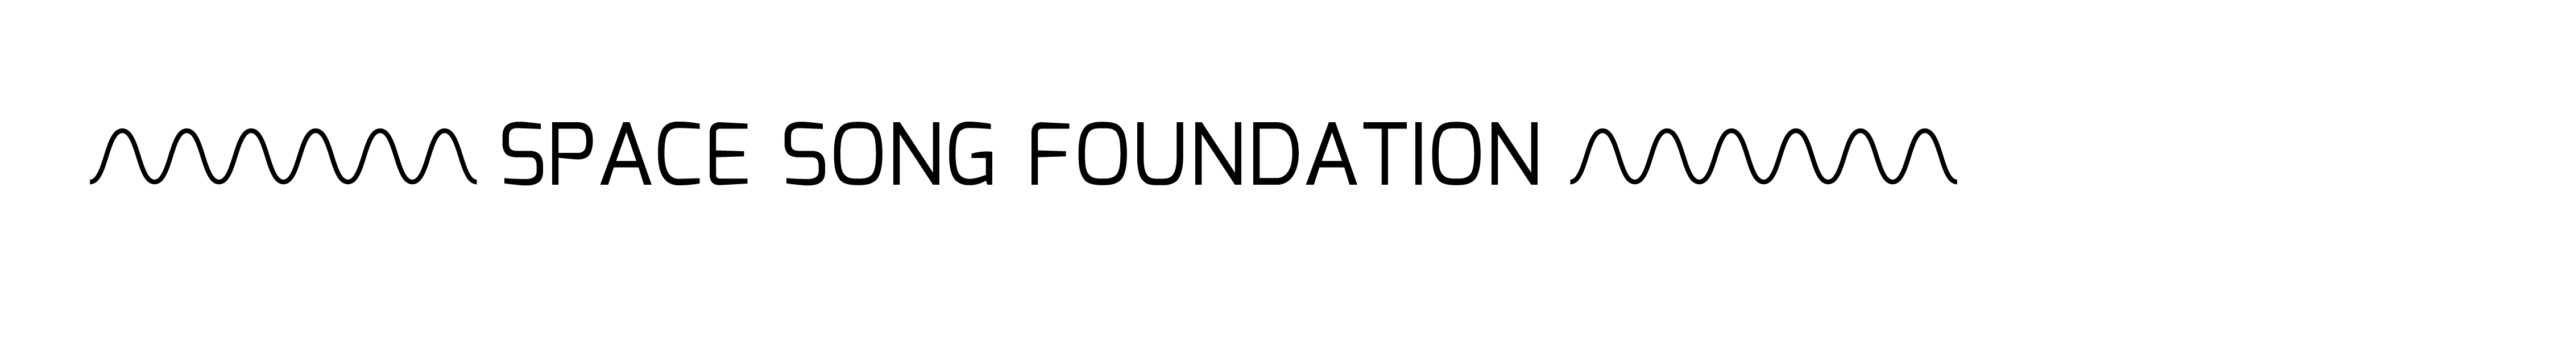 Space Song Foundation